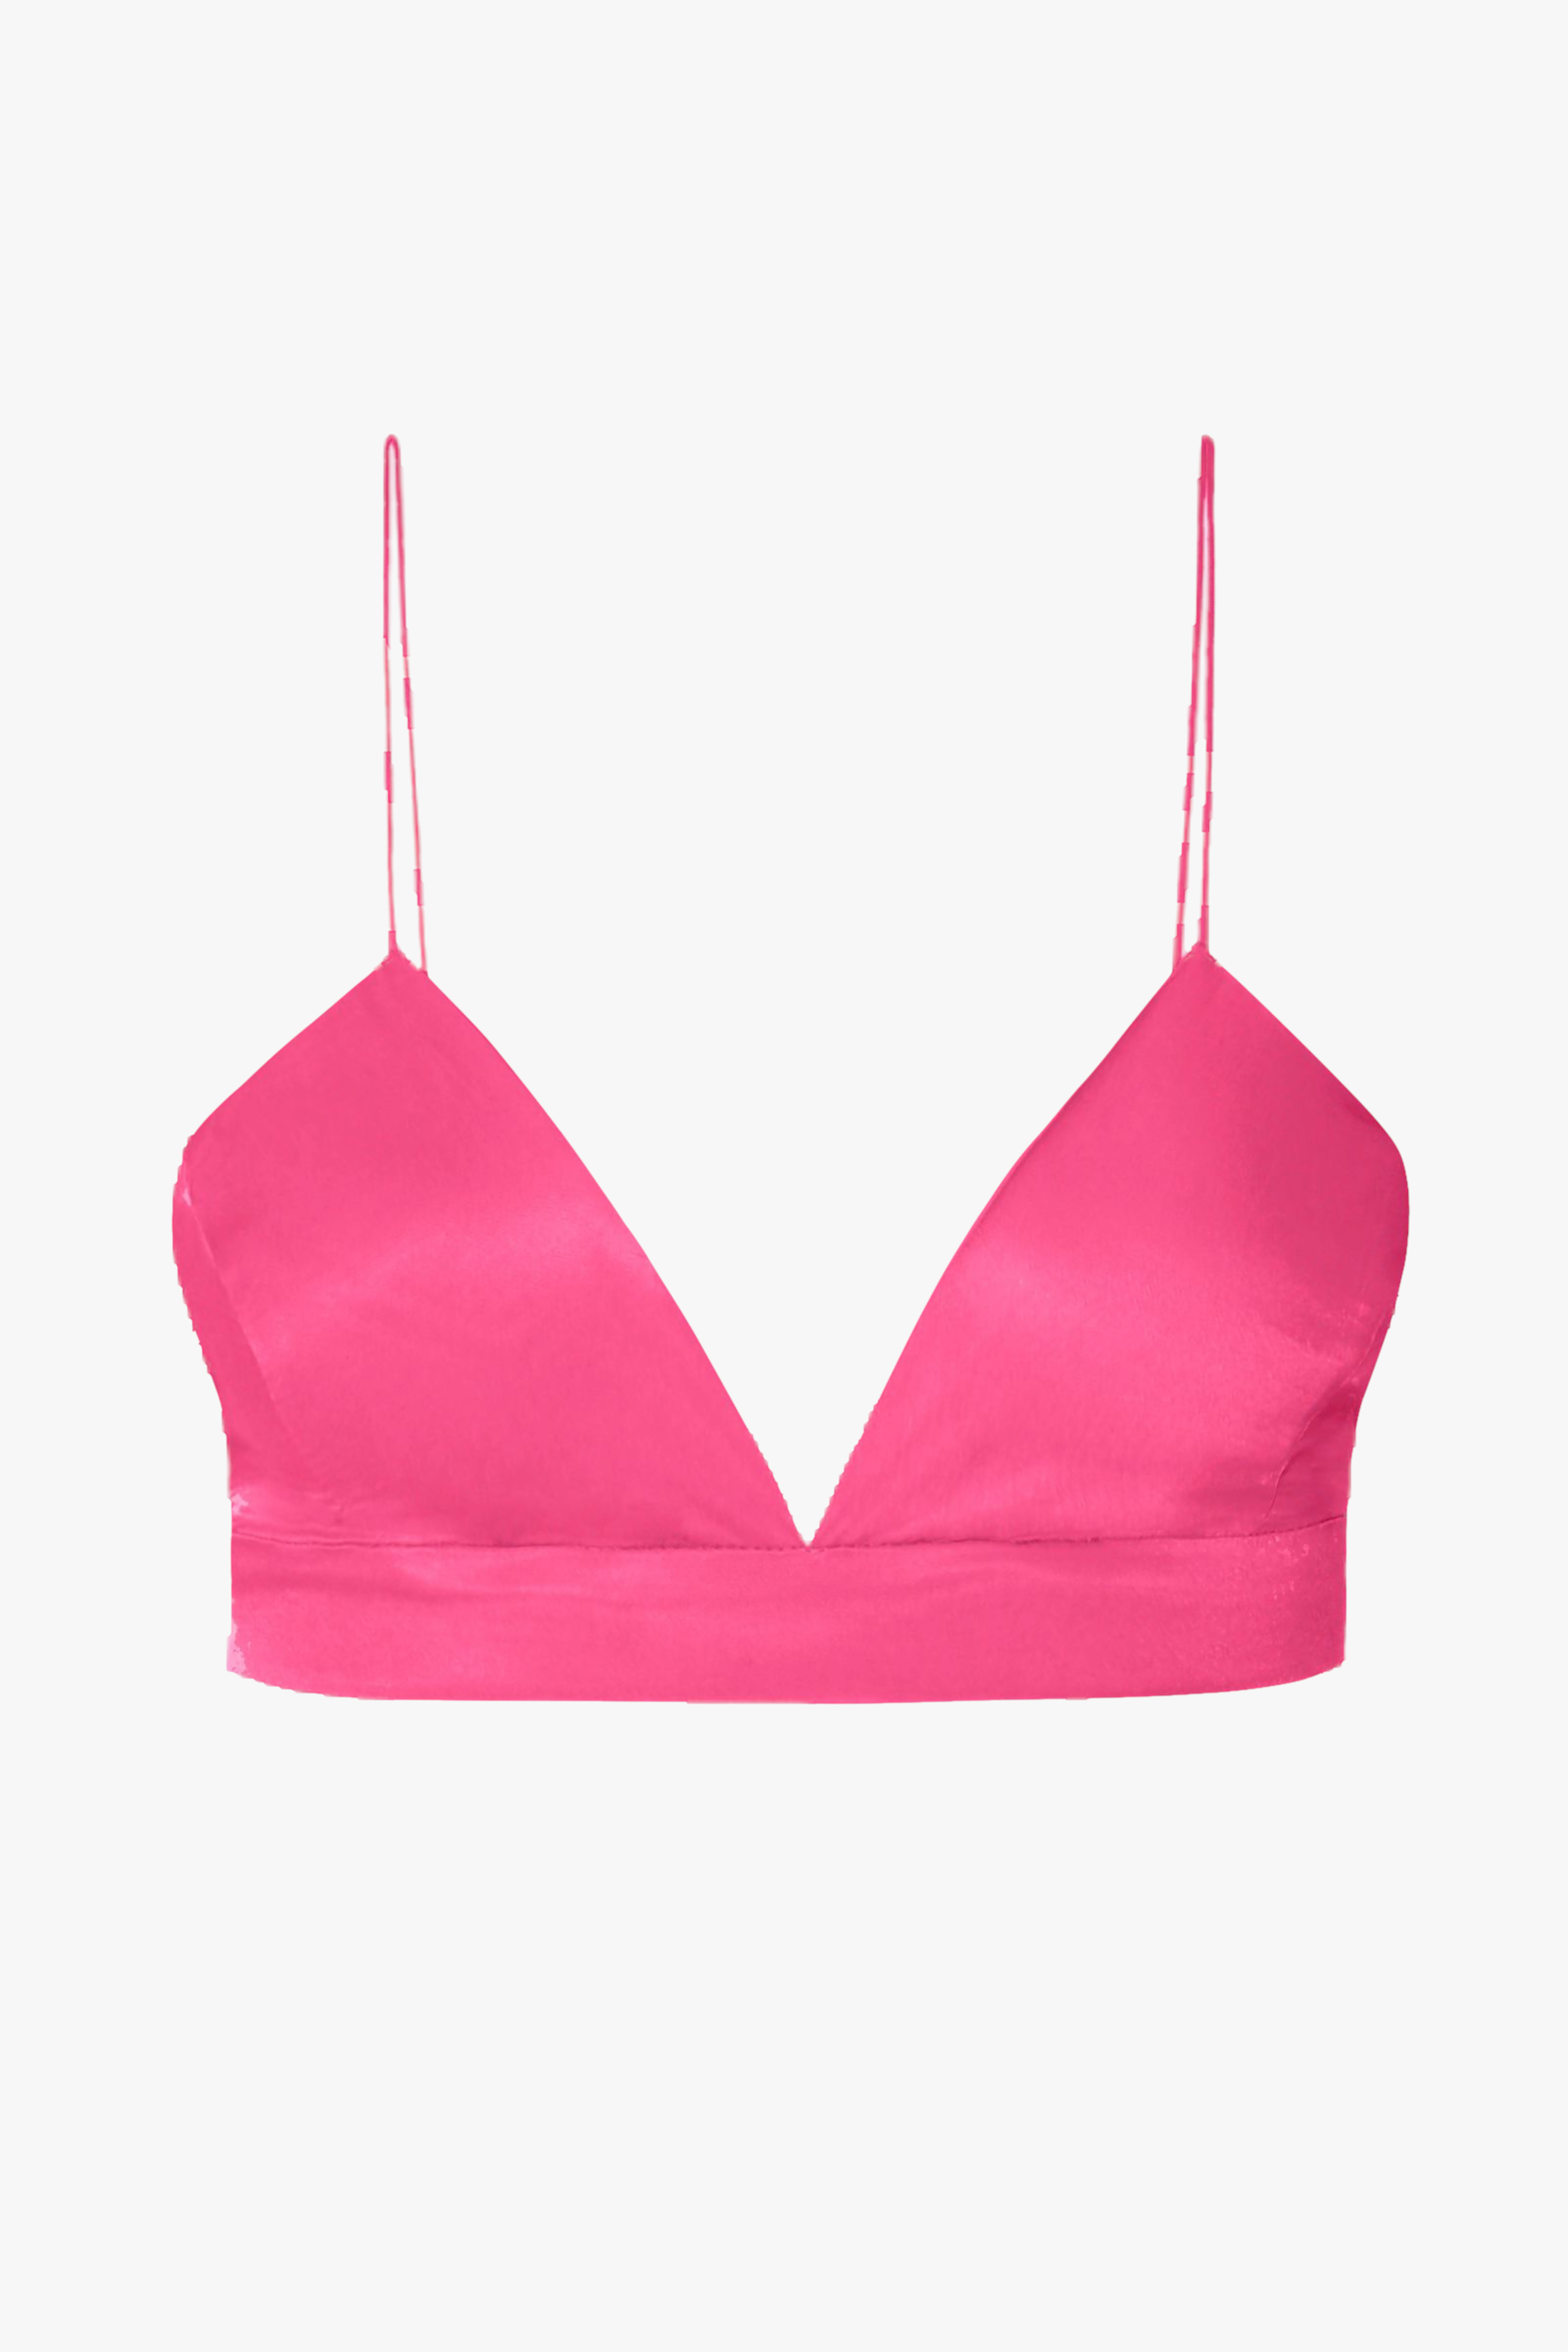 Shop Bralette Top Asha Satin Barbie Pink from AGGI at Seezona